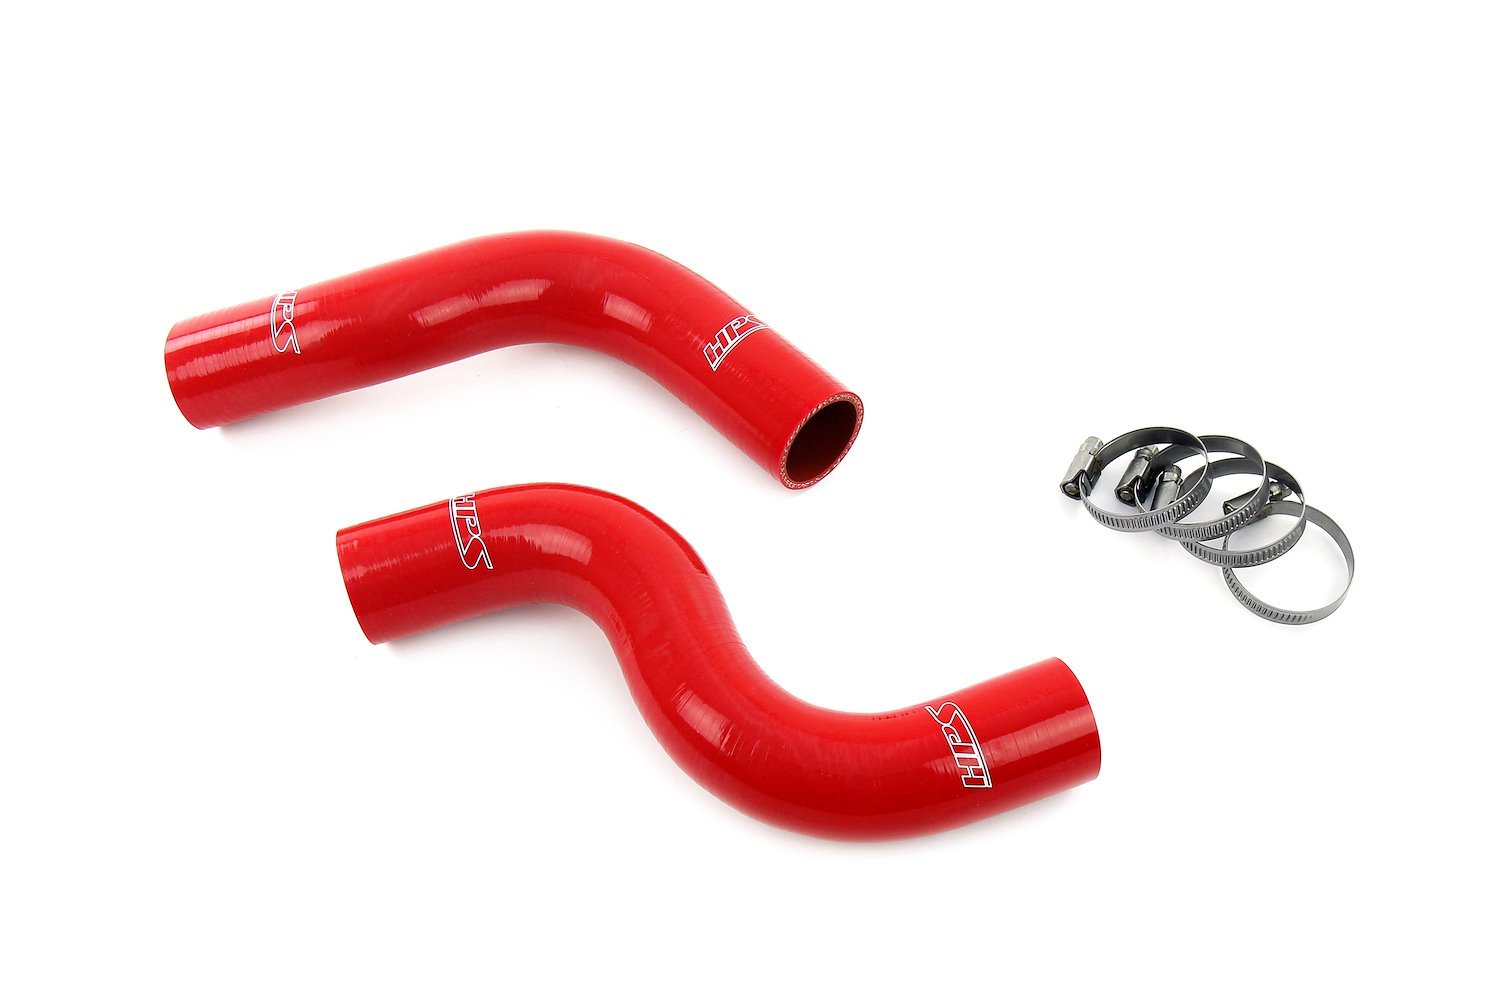 57-2109-RED Radiator Hose Kit, 3-Ply Reinforced Silicone, Replaces Rubber Radiator Coolant Hoses